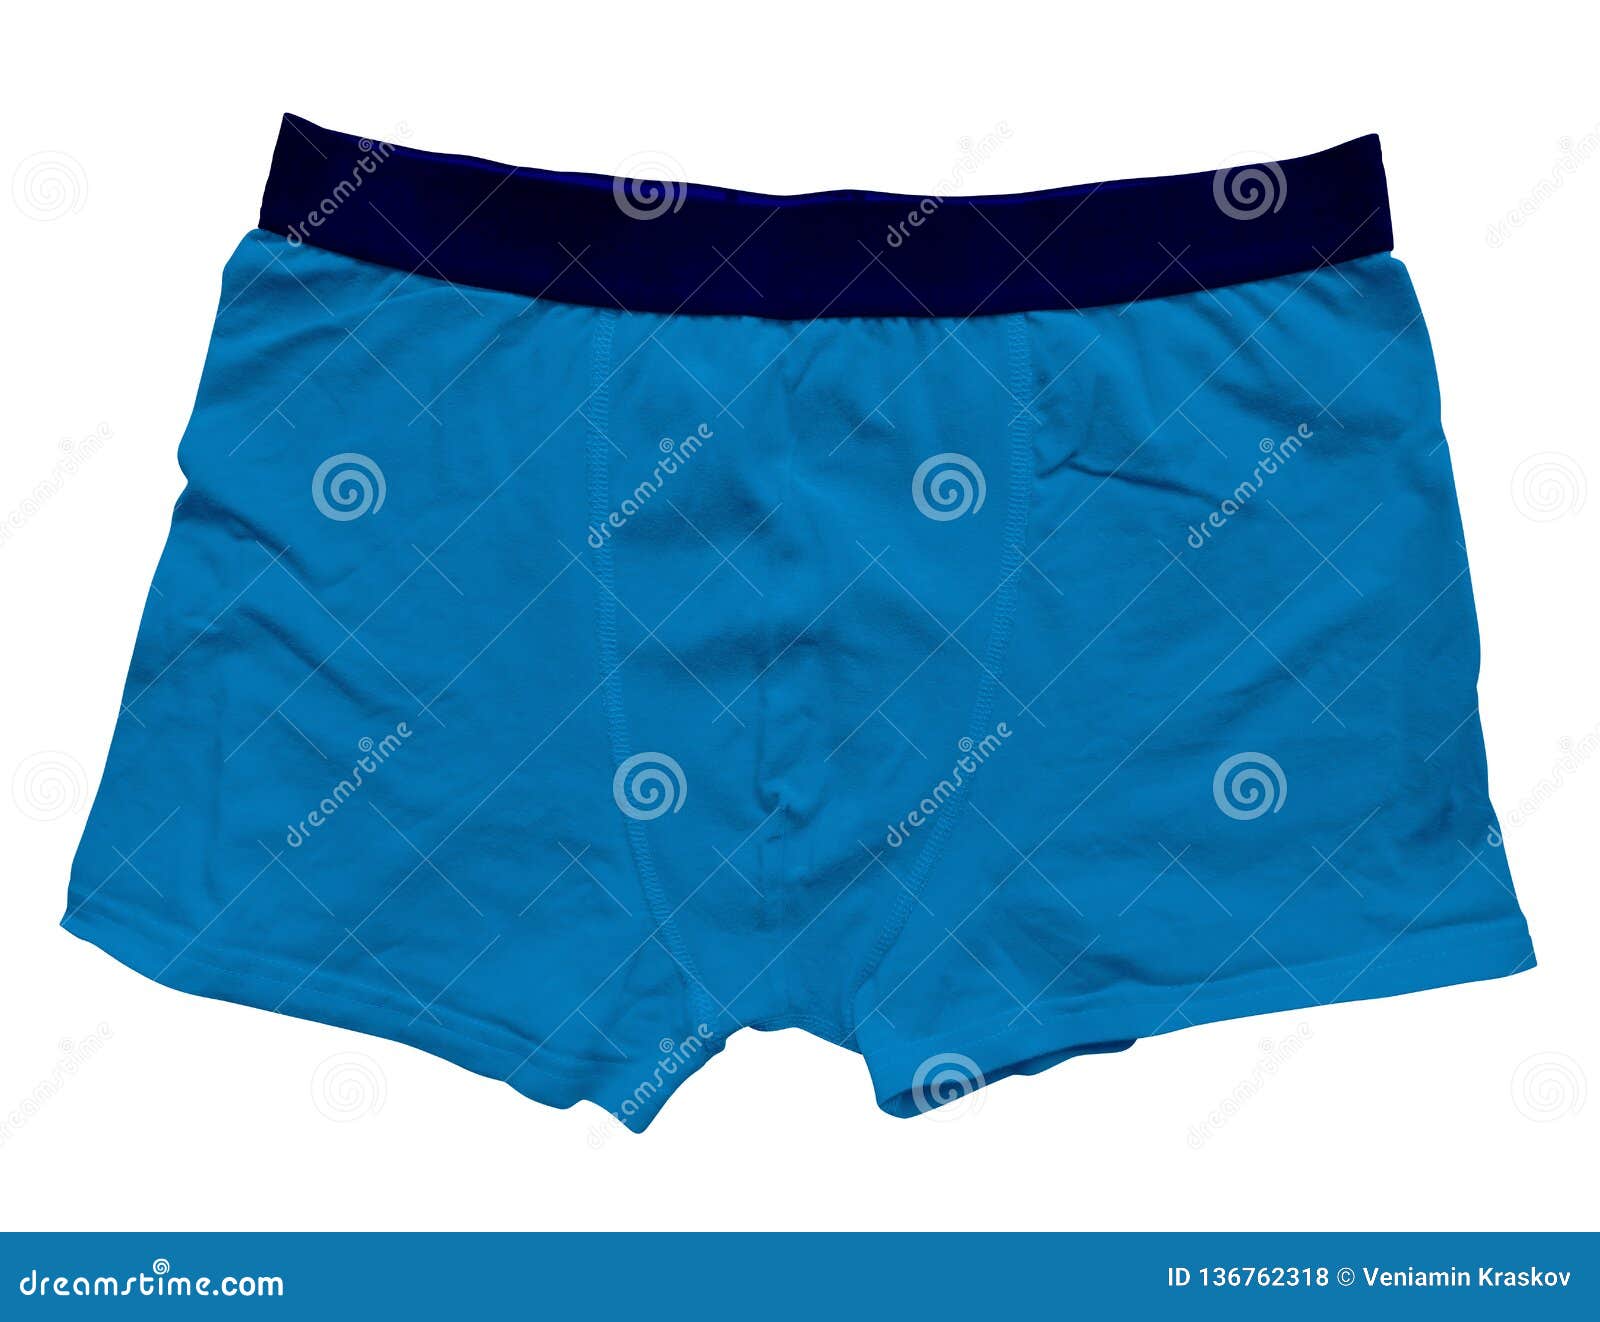 Male Underwear Isolated - Blue Stock Photo - Image of apparel, single ...